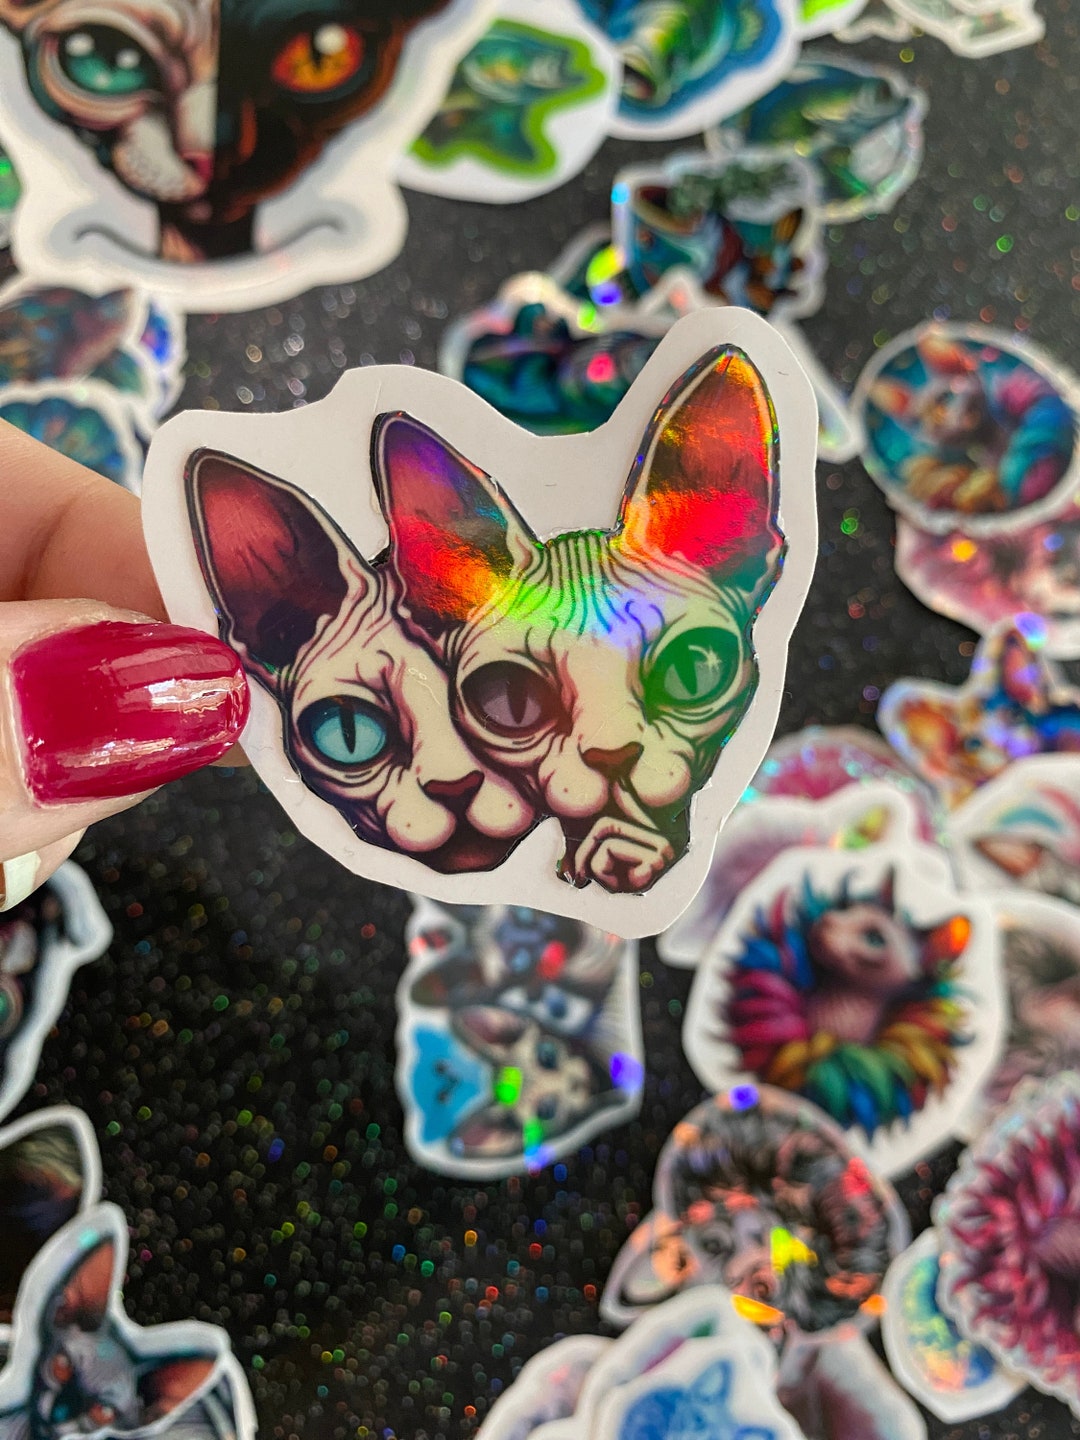 Creepy Cute Sphynx Love Cat Stickers Holographic Sparkle Horror Kittens Rainbow Naked Cat Art